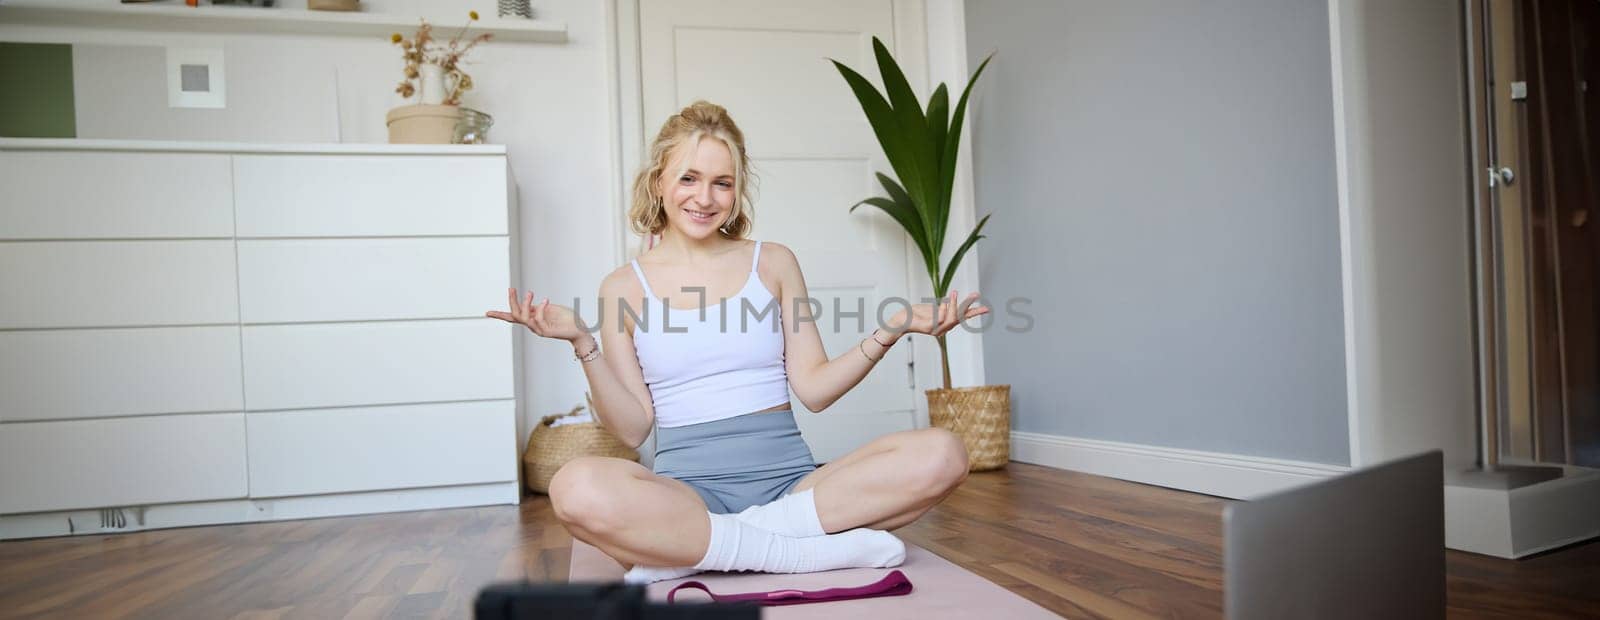 Young female athlete, fitness instructor woman sits on floor rubber mat, recording video on digital camera, showing how to workout, explaining exercises.